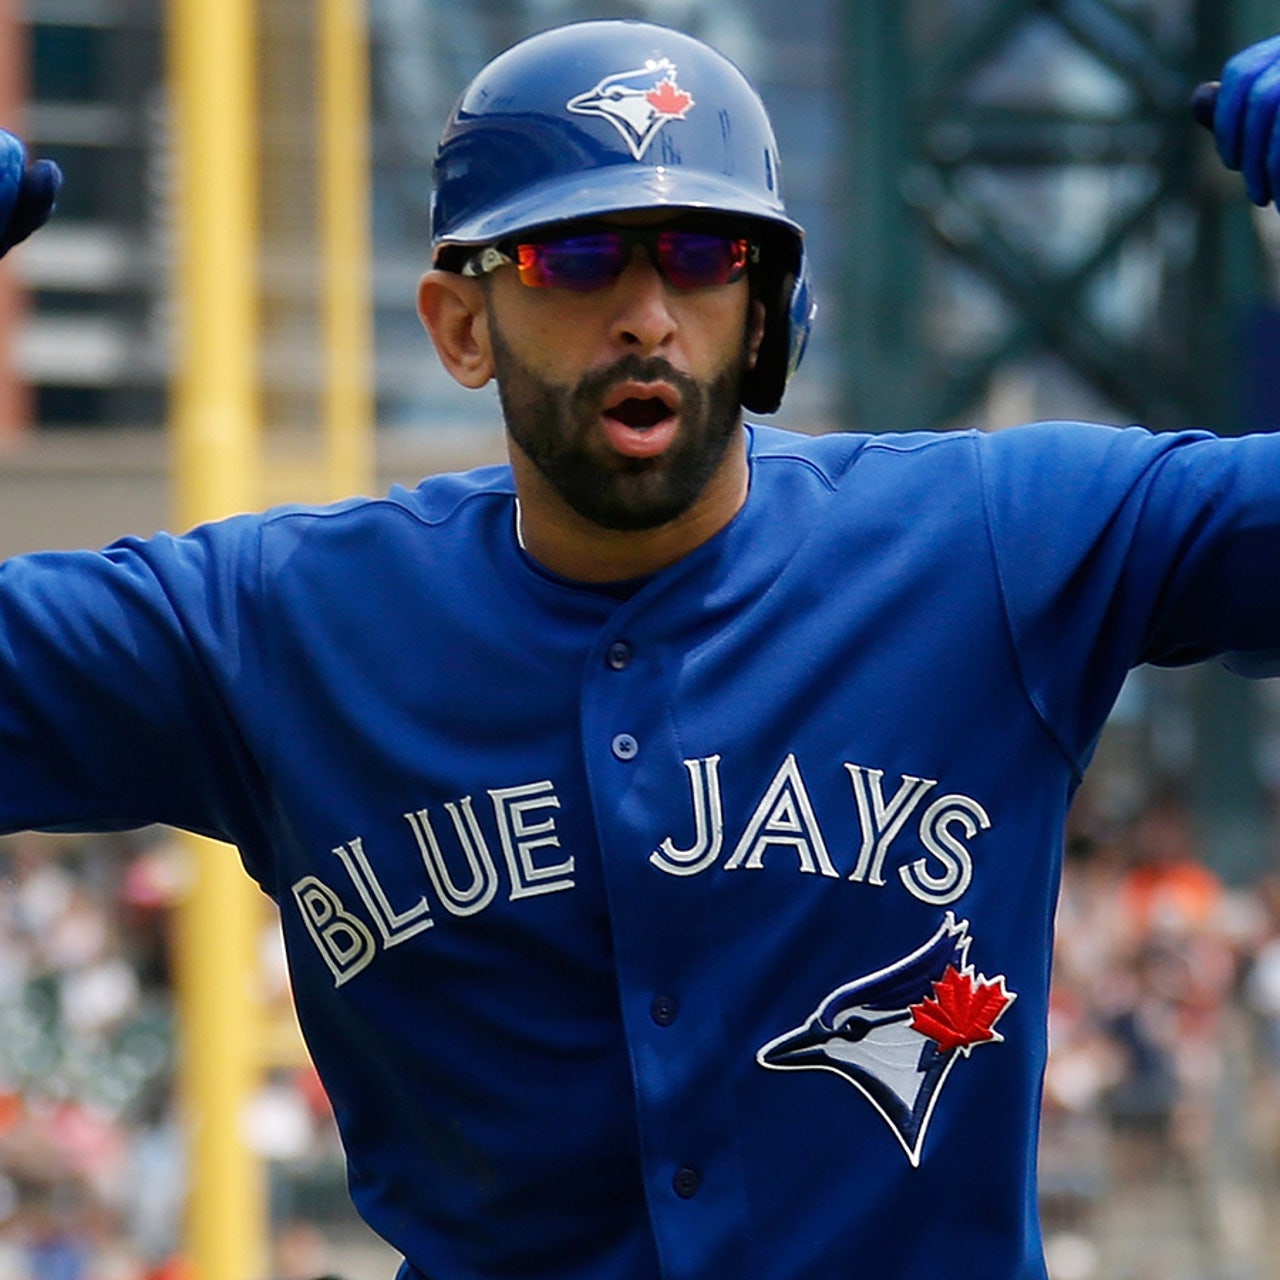 Jose Bautista trades jersey off his back to fan for Lionel Messi